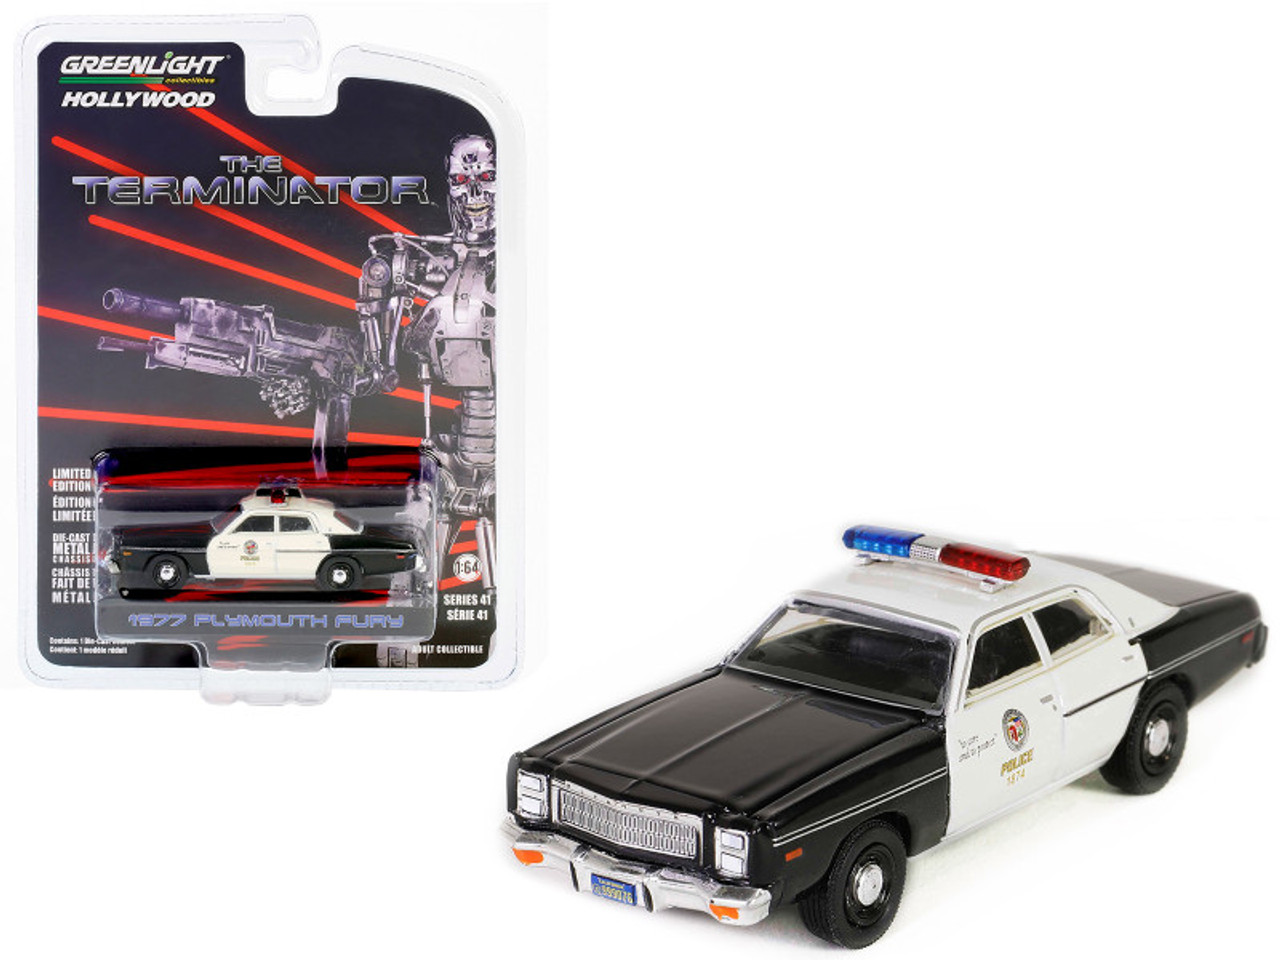 1977 Plymouth Fury Black and White "Metropolitan Police" "The Terminator" (1984) Movie "Hollywood Series" Release 41 1/64 Diecast Model Car by Greenlight